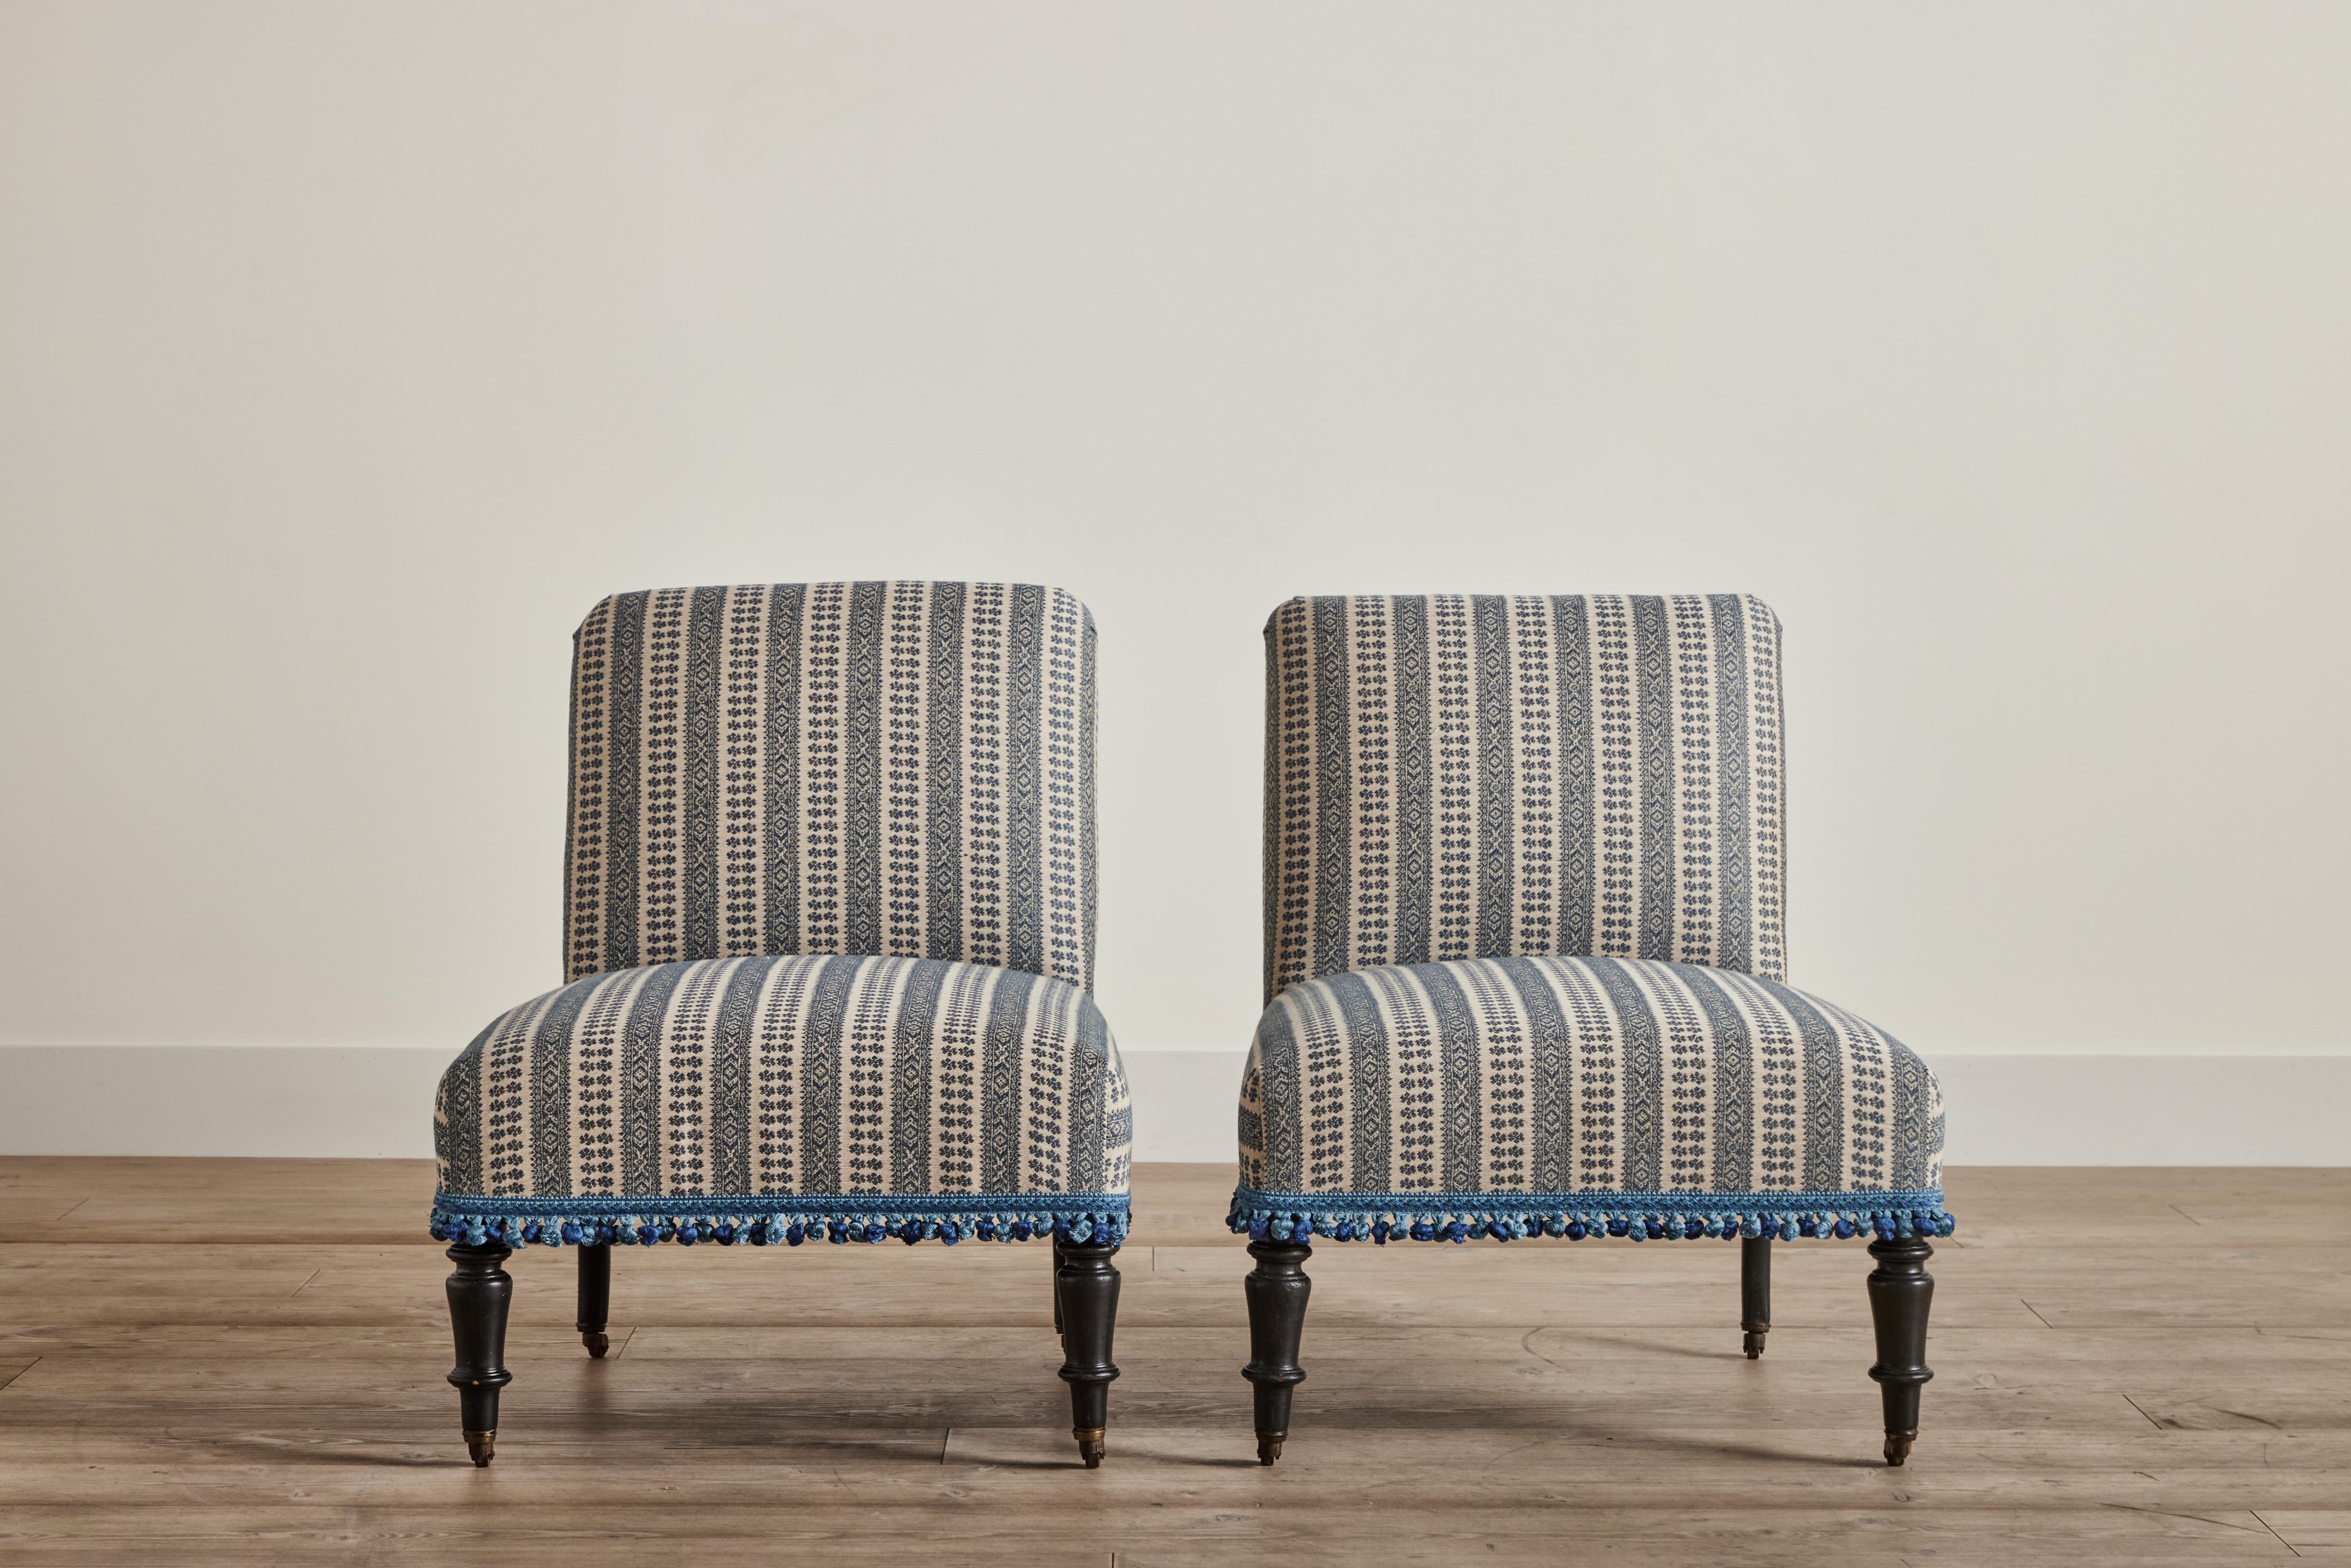 Pair of Napoleon III slipper chairs from France circa 1880. This pair has been newly upholstered in Susan Deliss fabric “Patmos” weave in Smokey Blue with vintage Italian tassel trim. Some wear on original wood legs that is consistent with age and